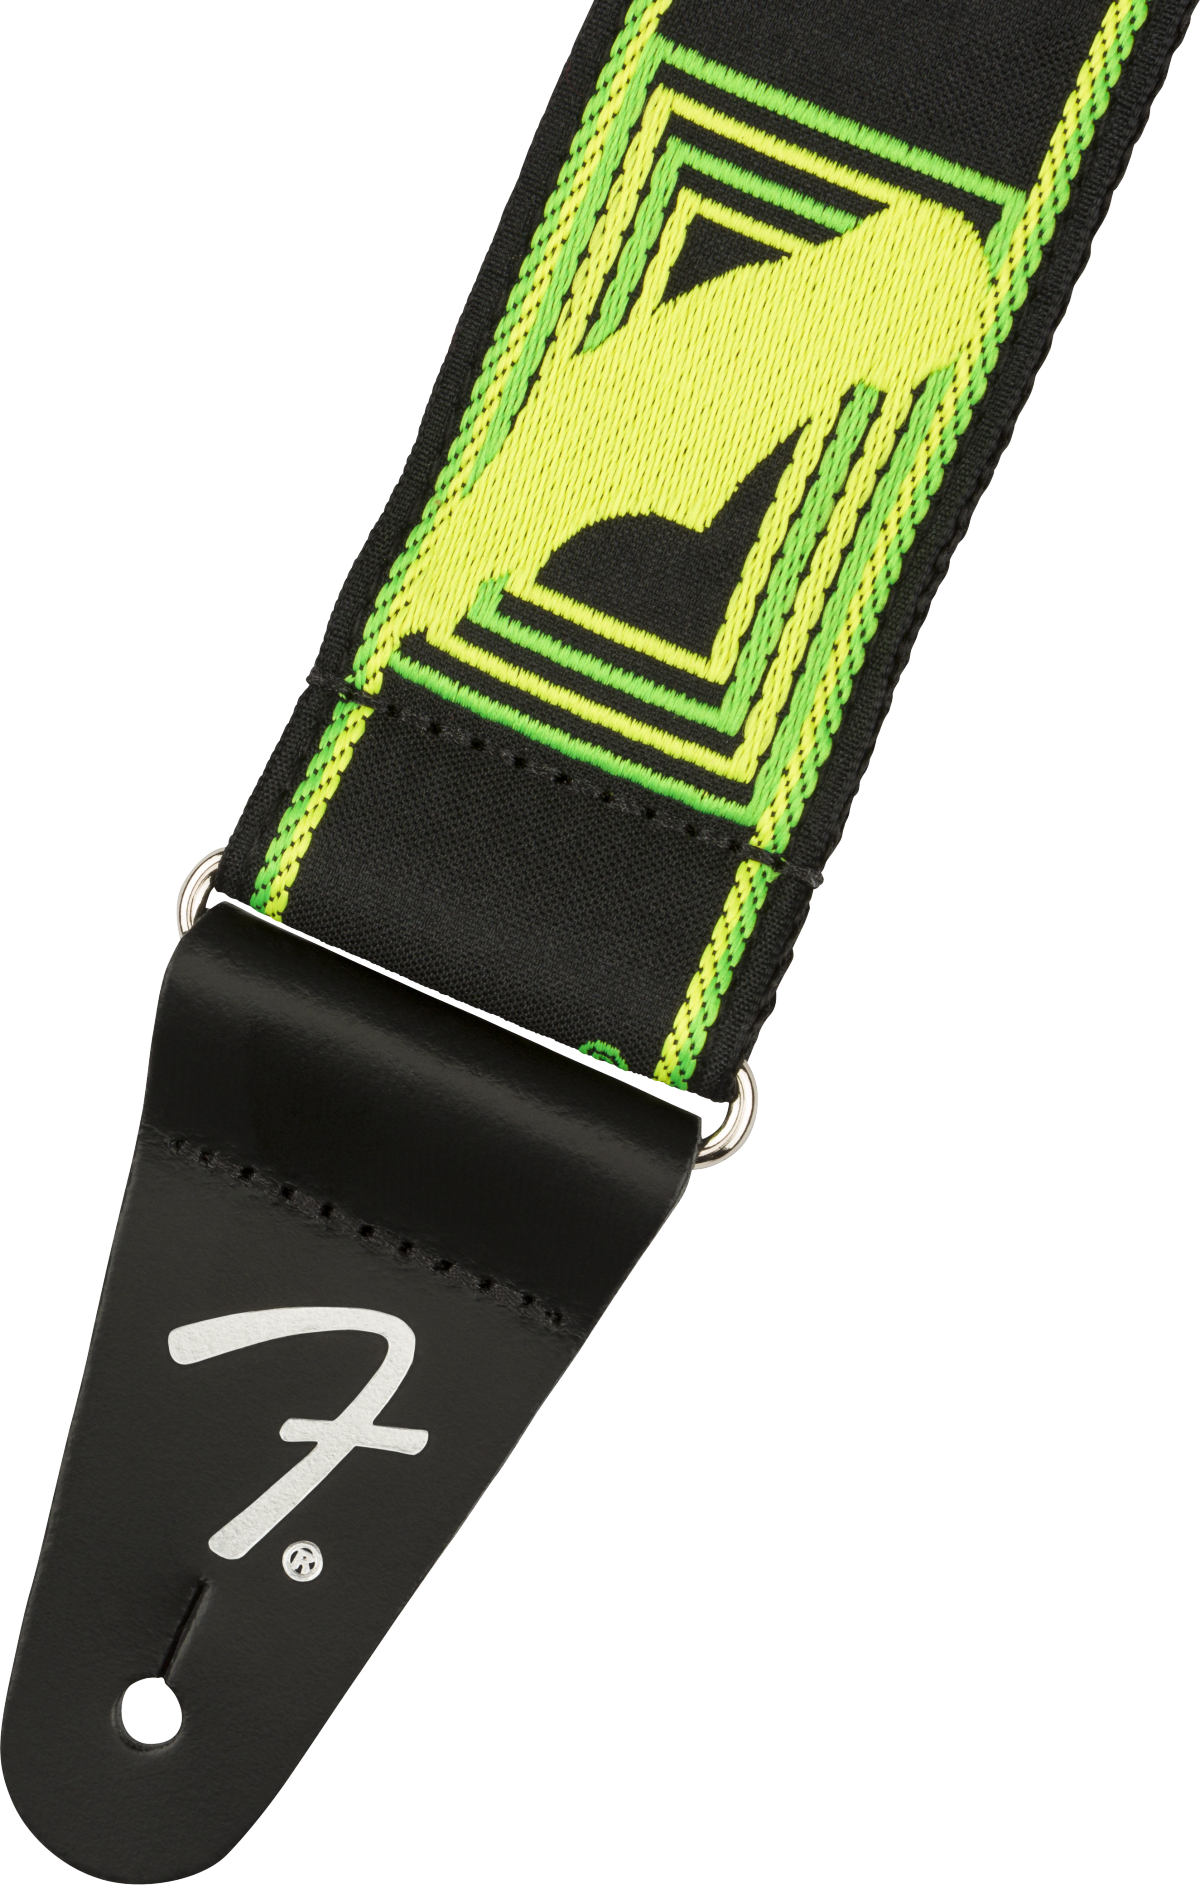 Neon Monogrammed Strap green and yellow